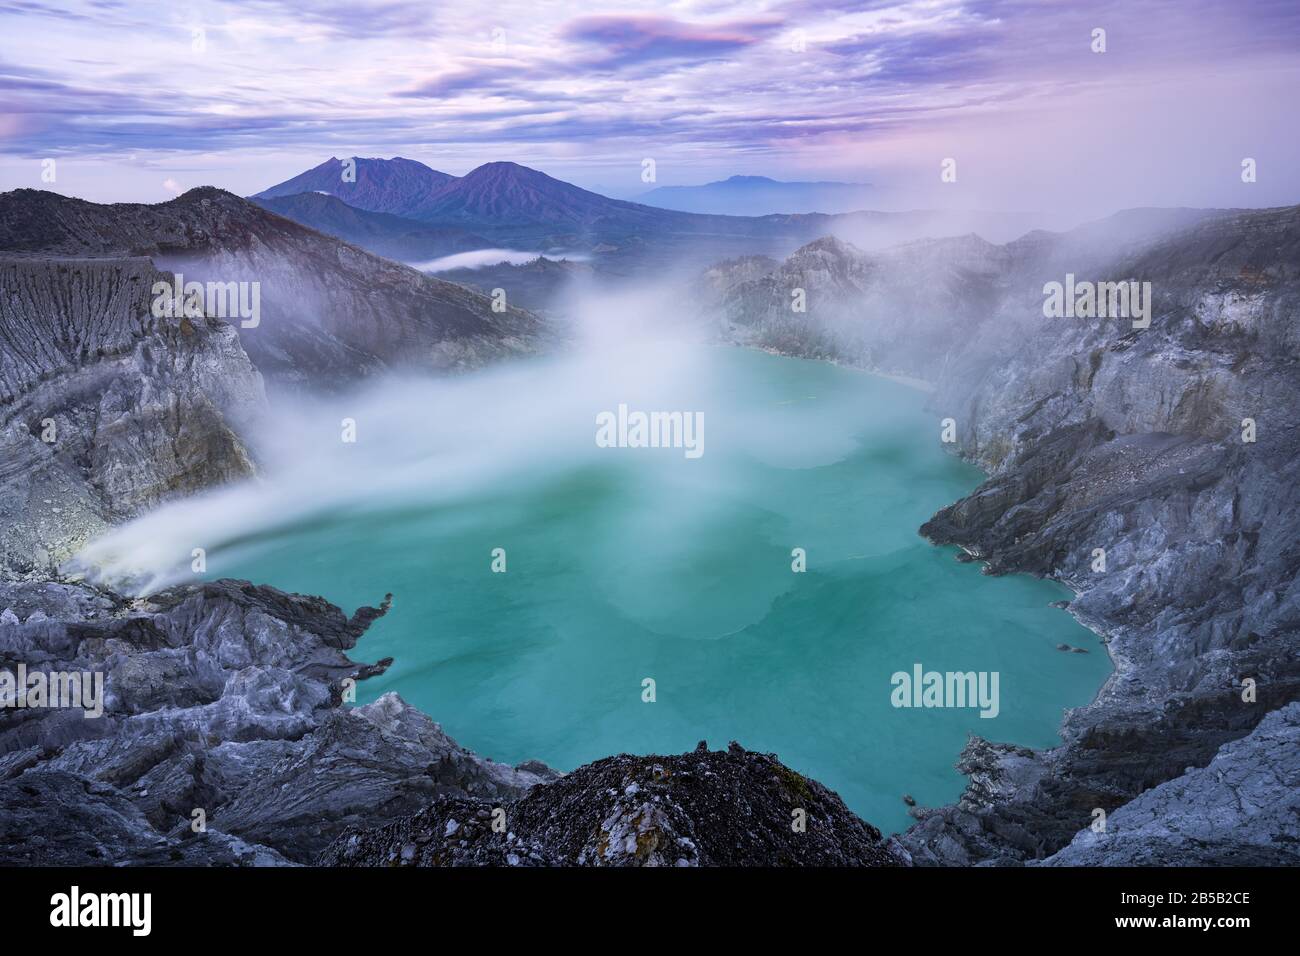 View from above, stunning view of the Ijen volcano with the turquoise-coloured acidic crater lake. Stock Photo